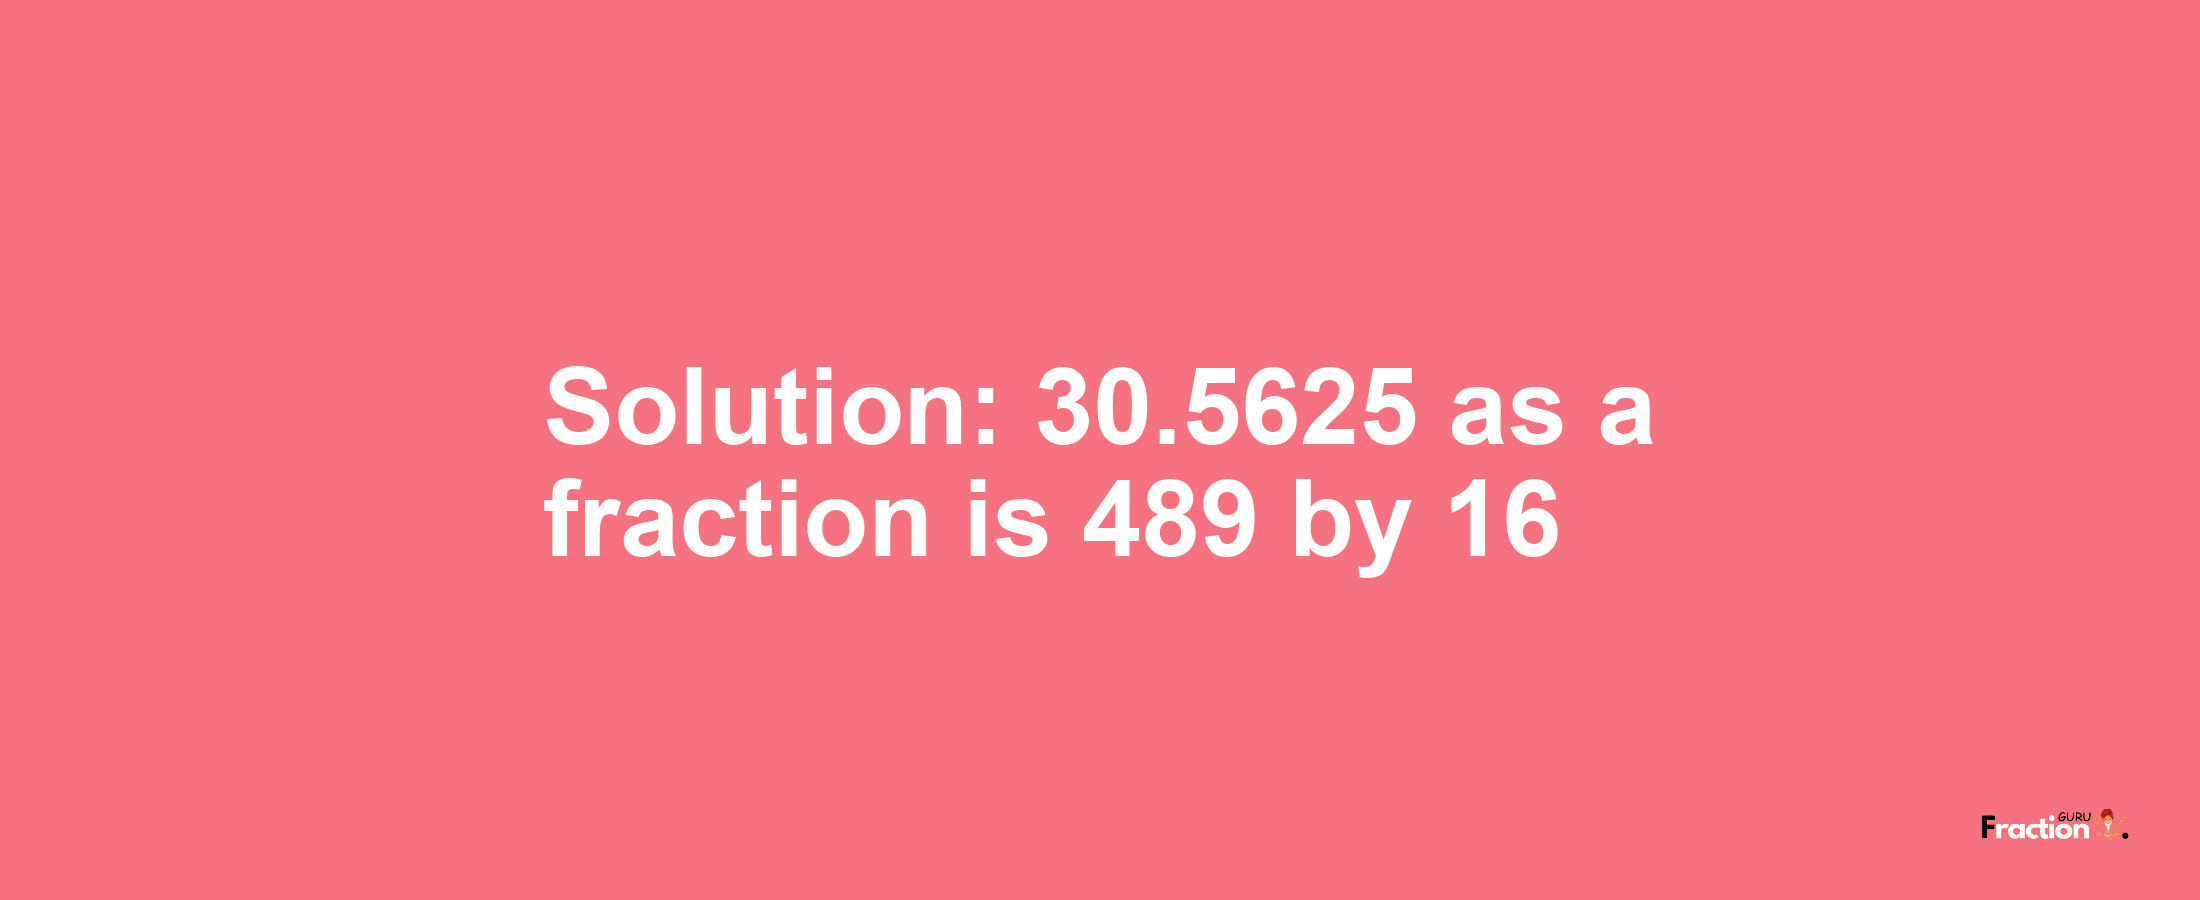 Solution:30.5625 as a fraction is 489/16